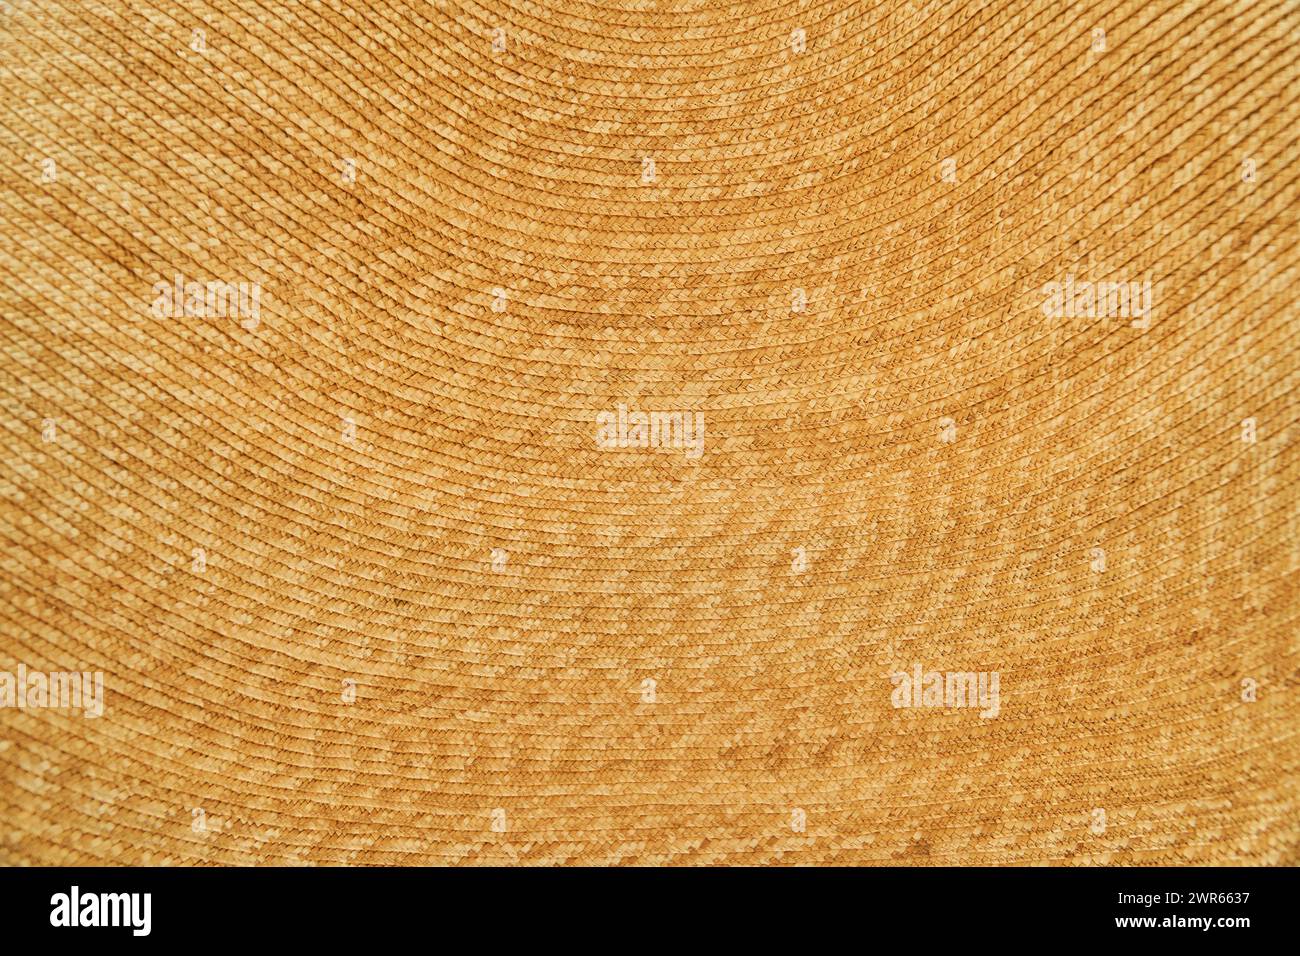 Wide textured braided straw rustic surface background Stock Photo